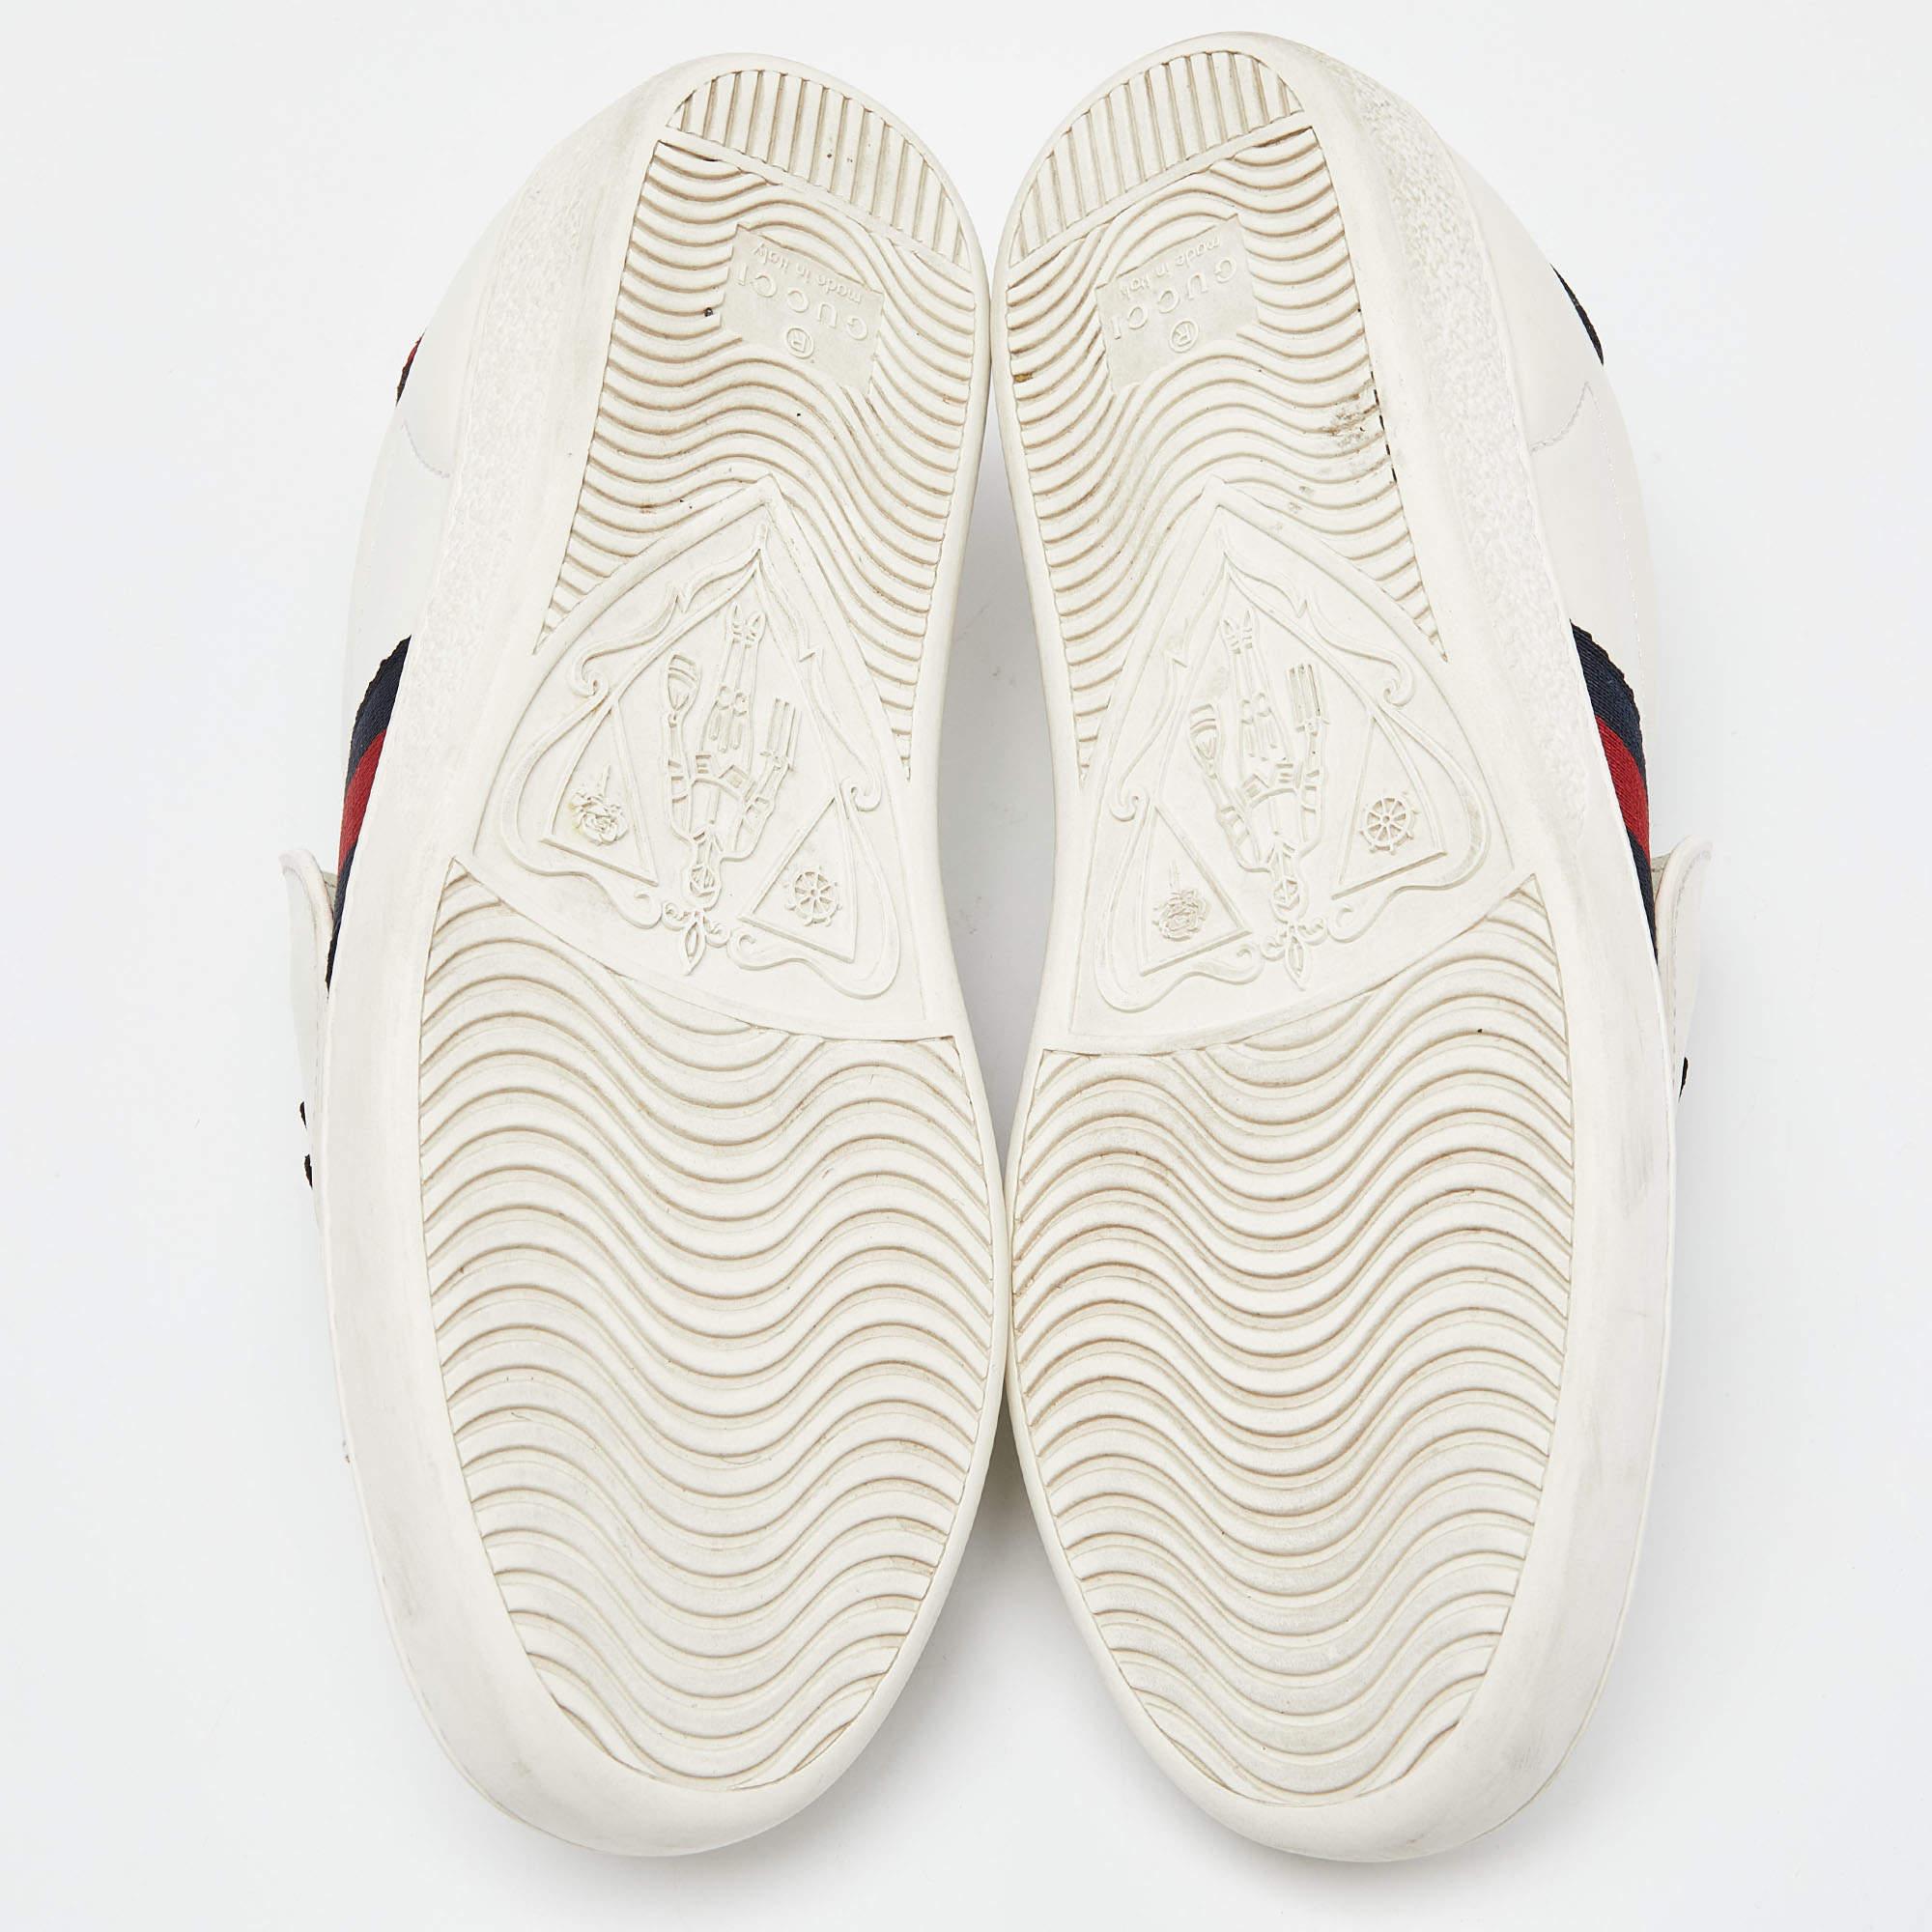 Gucci White Leather Embellished Pineapple Strap Ace Sneakers Size 35 For Sale 3